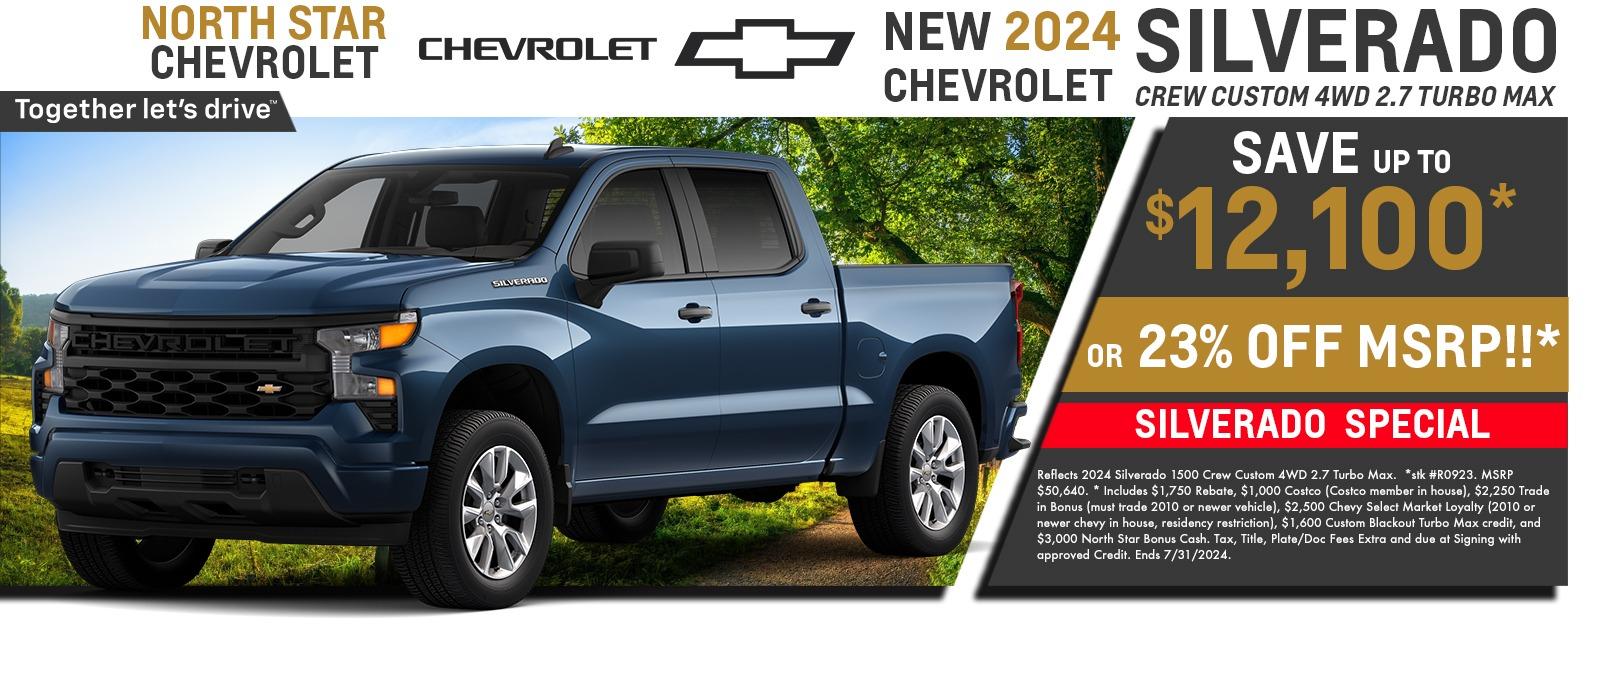 2024 Chevy Silverado save up to $12,100 23% off MSRP